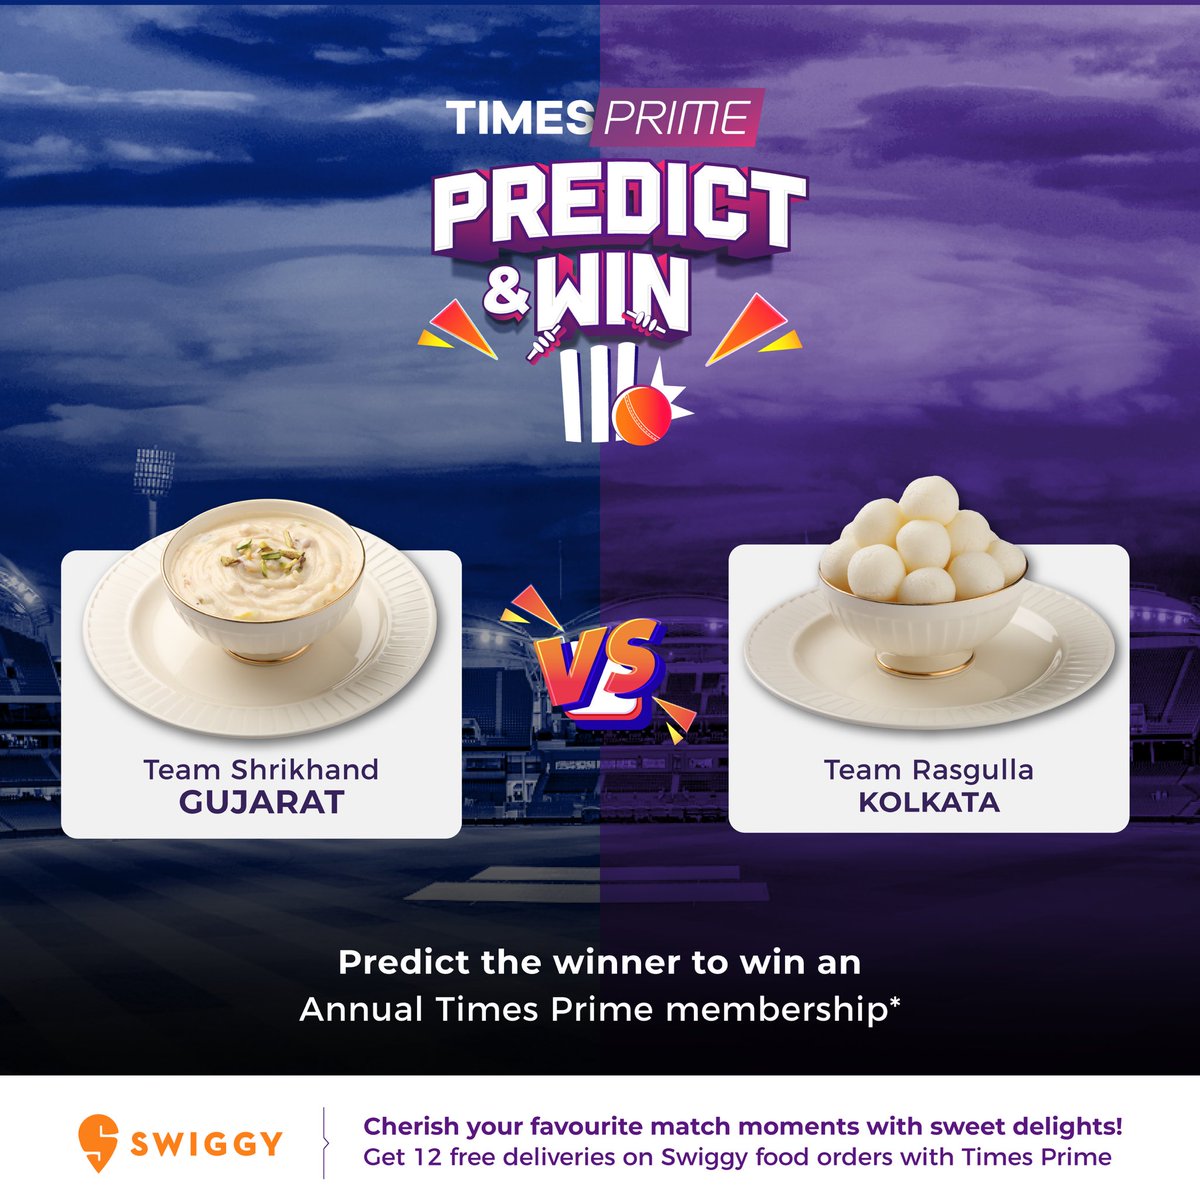 It’s Gujarat v/s Kolkata in the cricket field today! Predict who’ll win and get a chance to win a Times Prime Membership ! 🏏💯 #timesprimepredictandwin